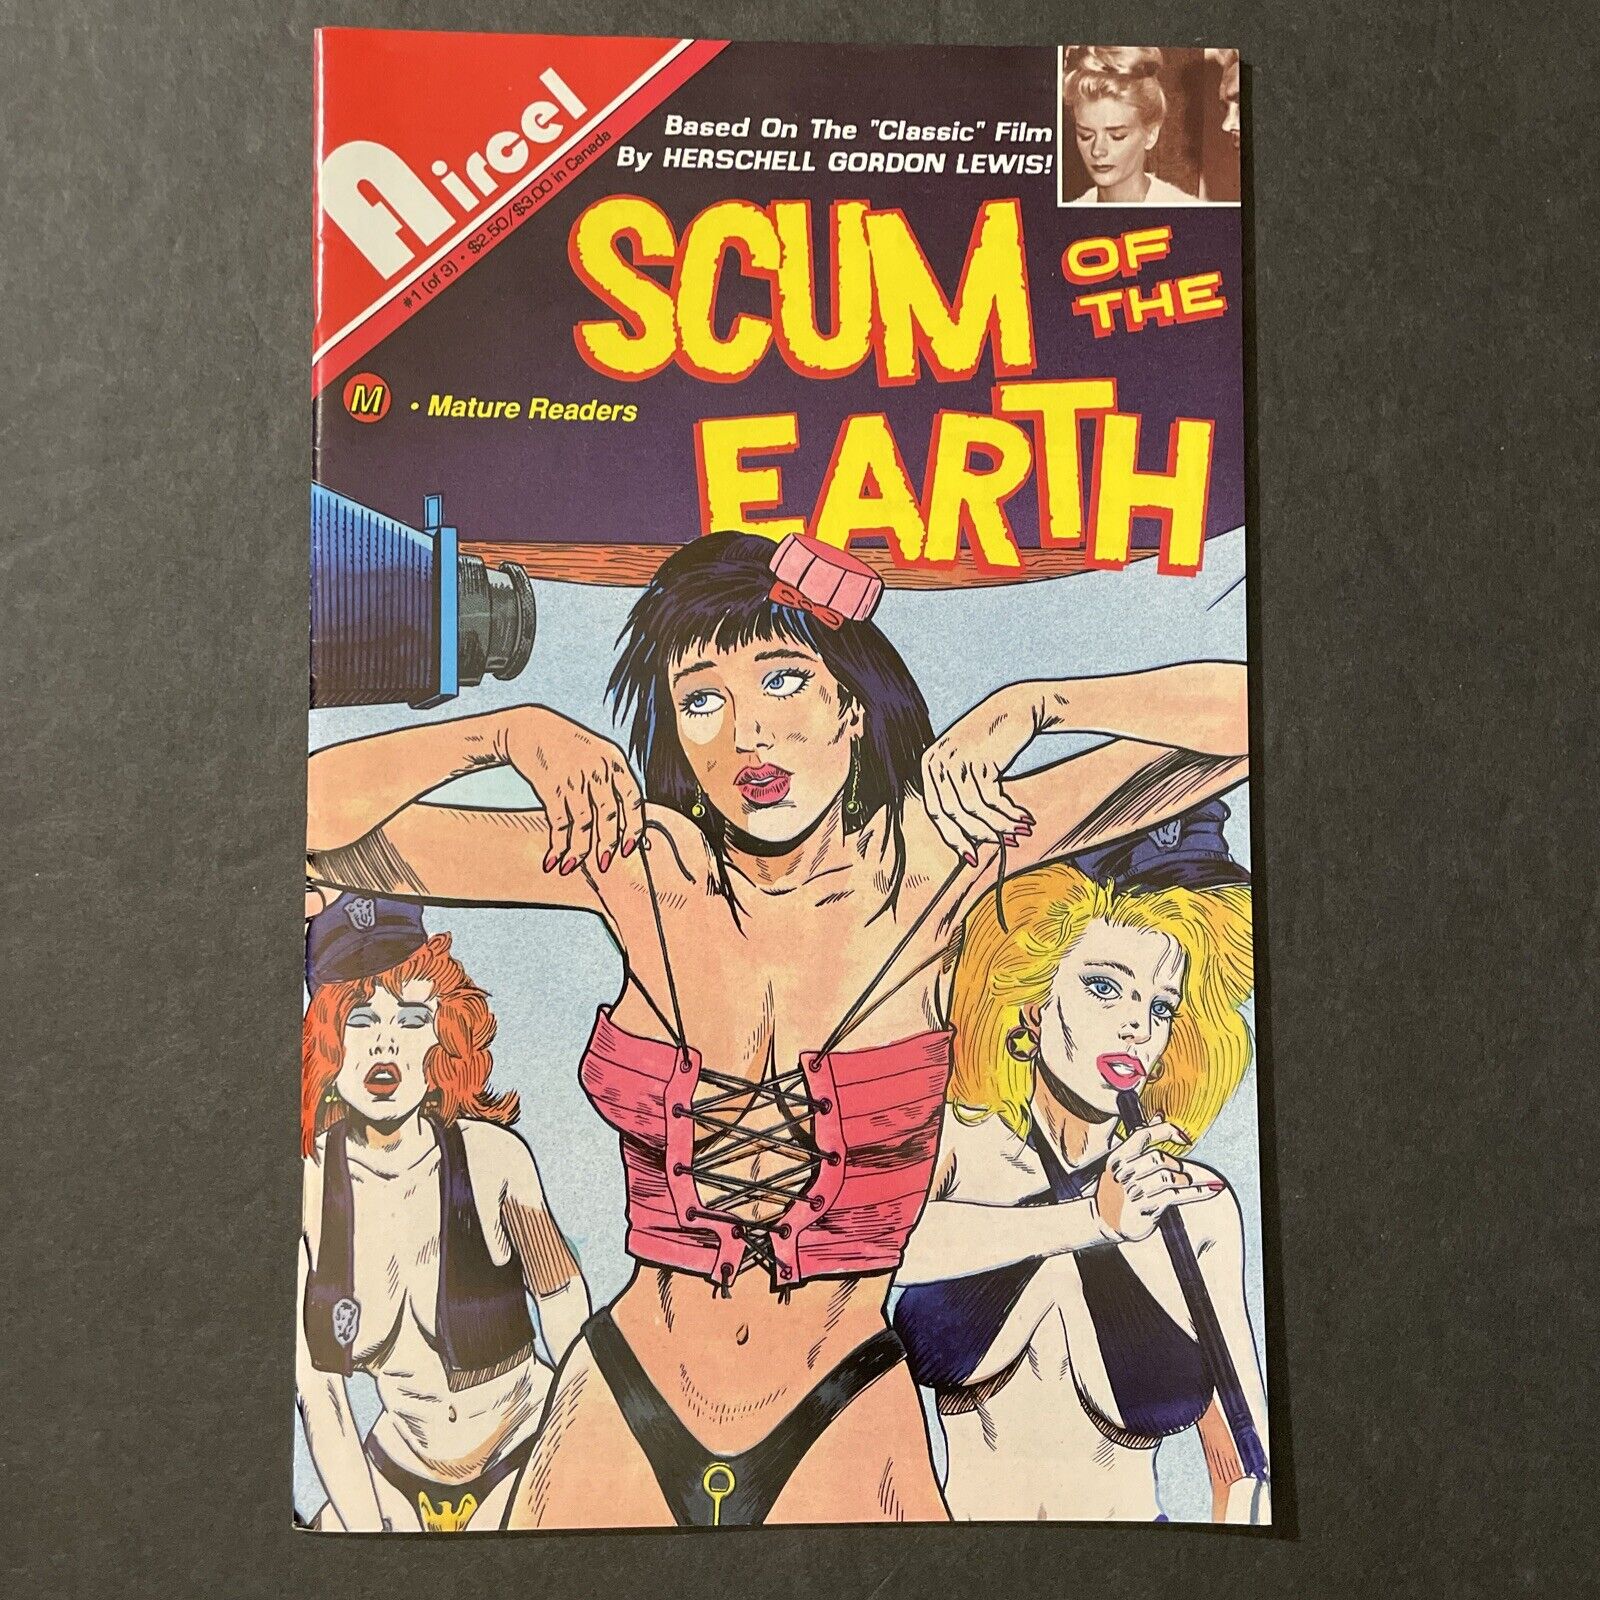 Scum Of The Earth 1 1991 Aircel Malibu Based Herschell Gordon Lewis\' Film MATURE